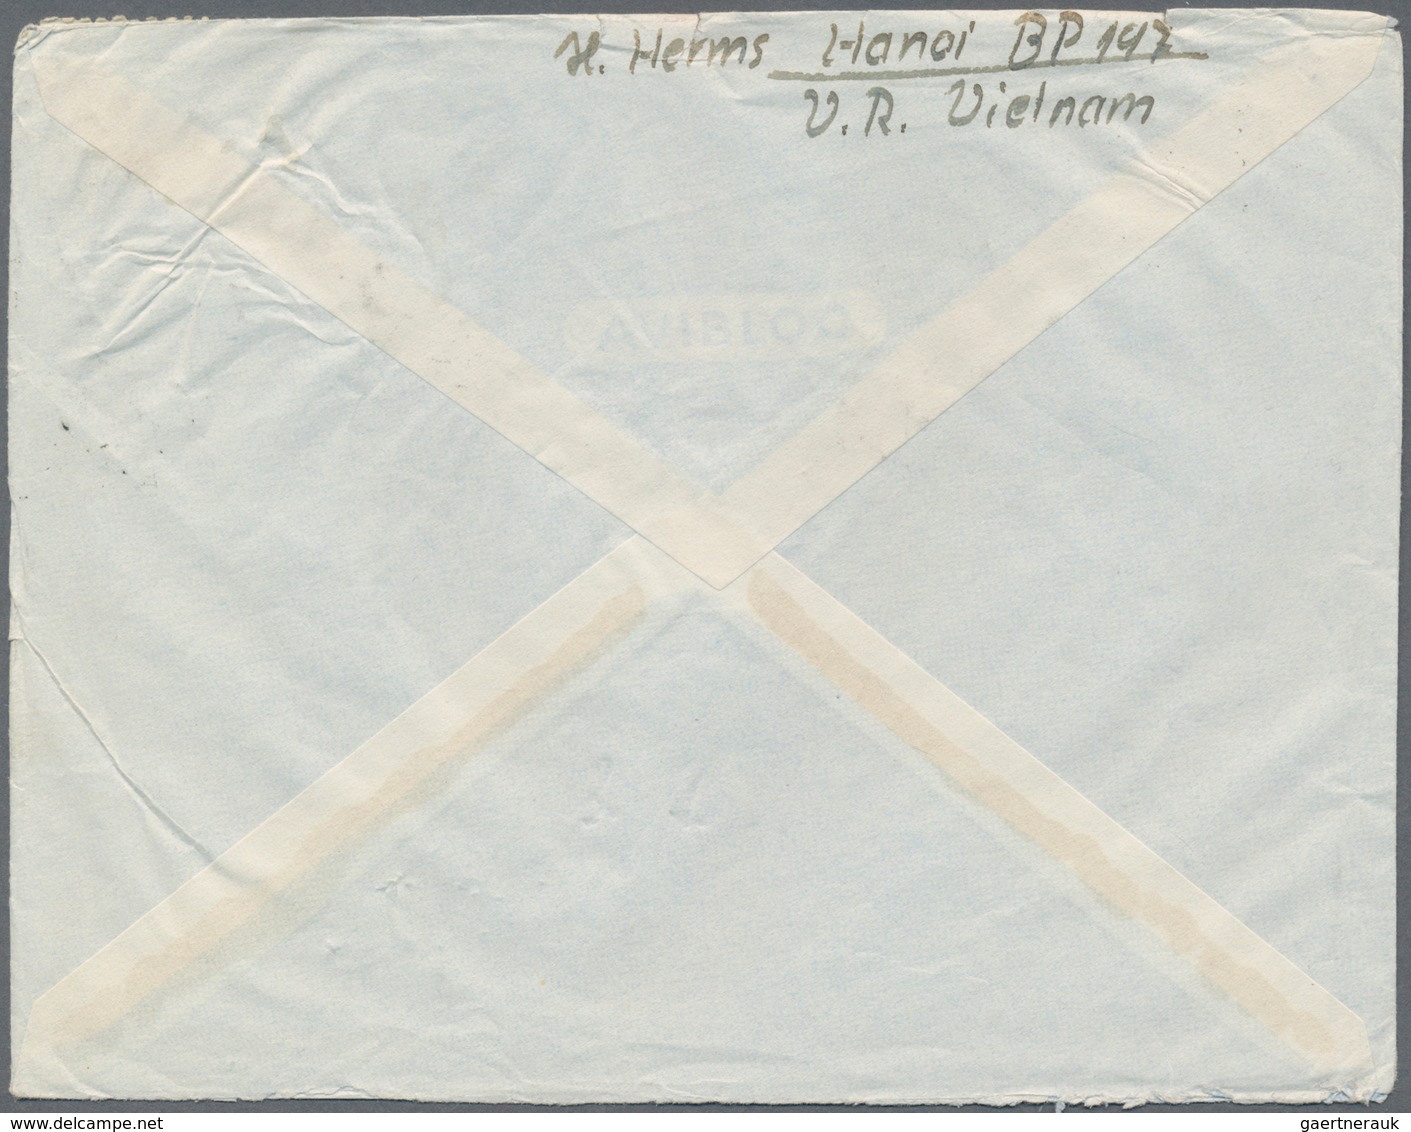 Vietnam-Nord (1945-1975): 1956, Airmail Cover Addressed To Berlin, East Germany, Bearing The Return - Vietnam